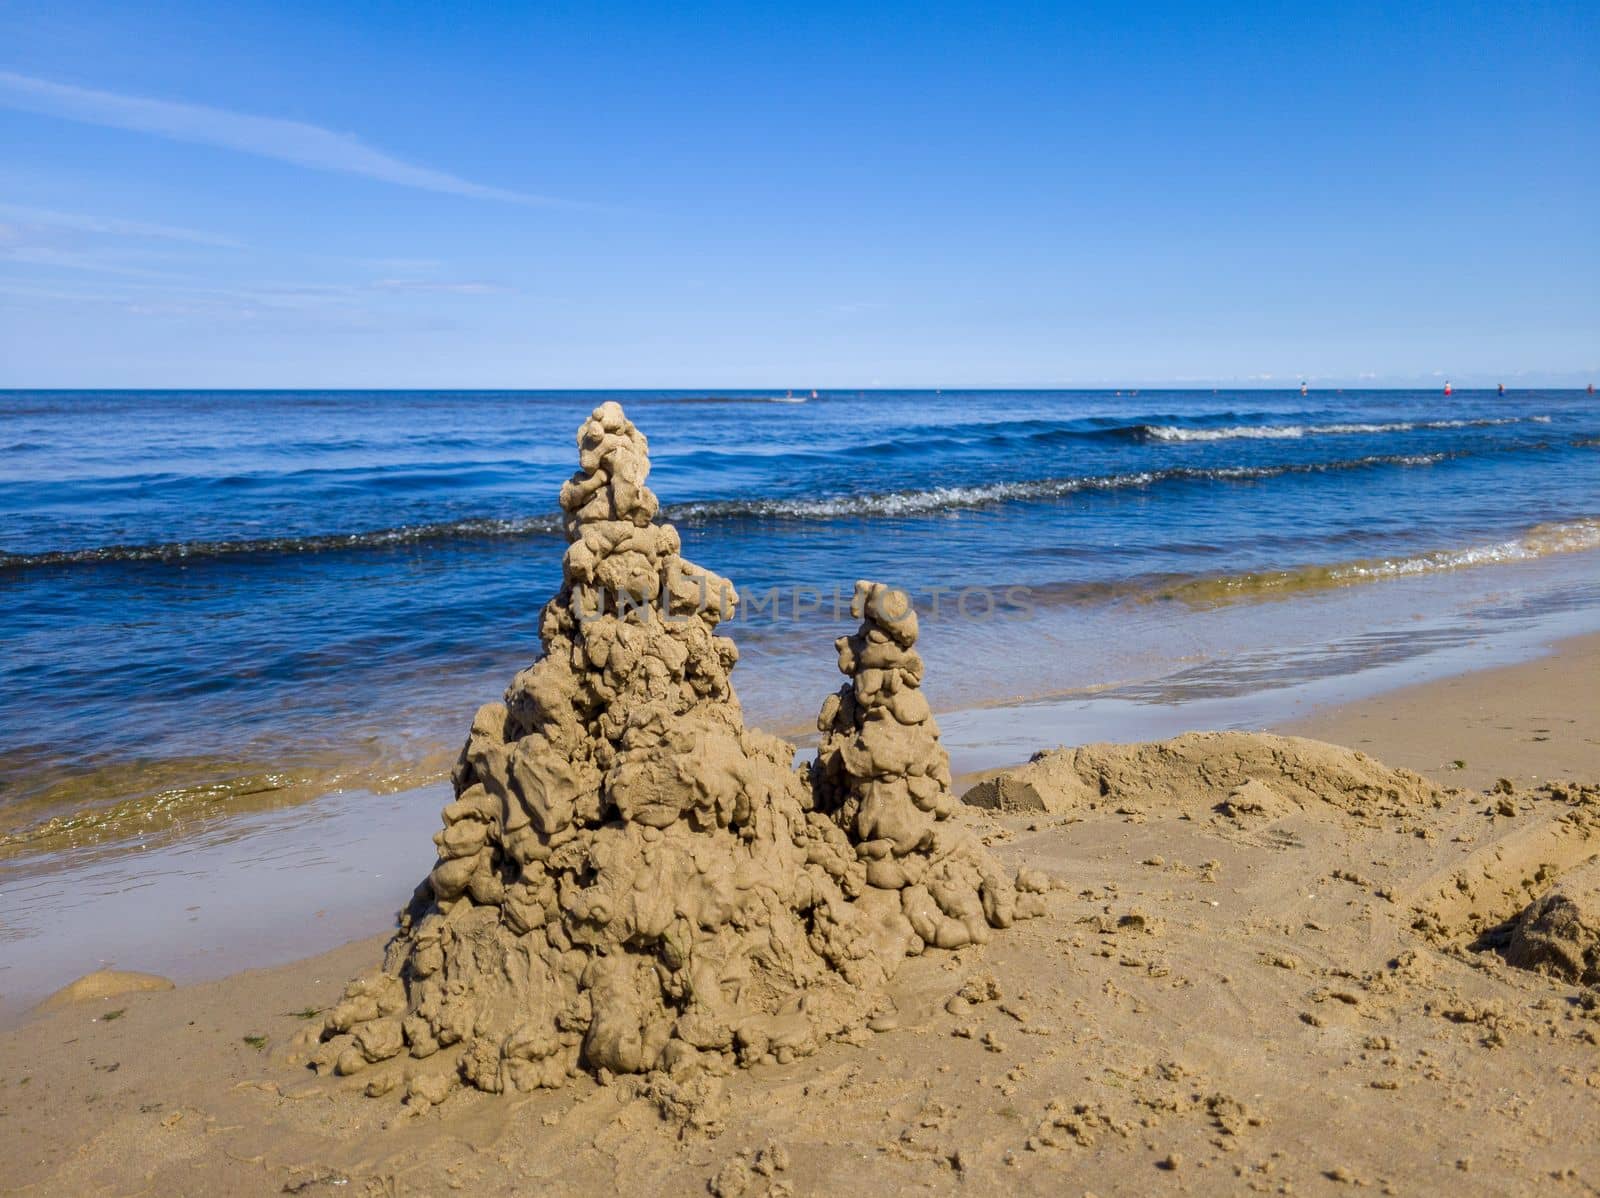 Built House sand castle with towers on the south shore of the sandy beach blue sea by Milanchikov